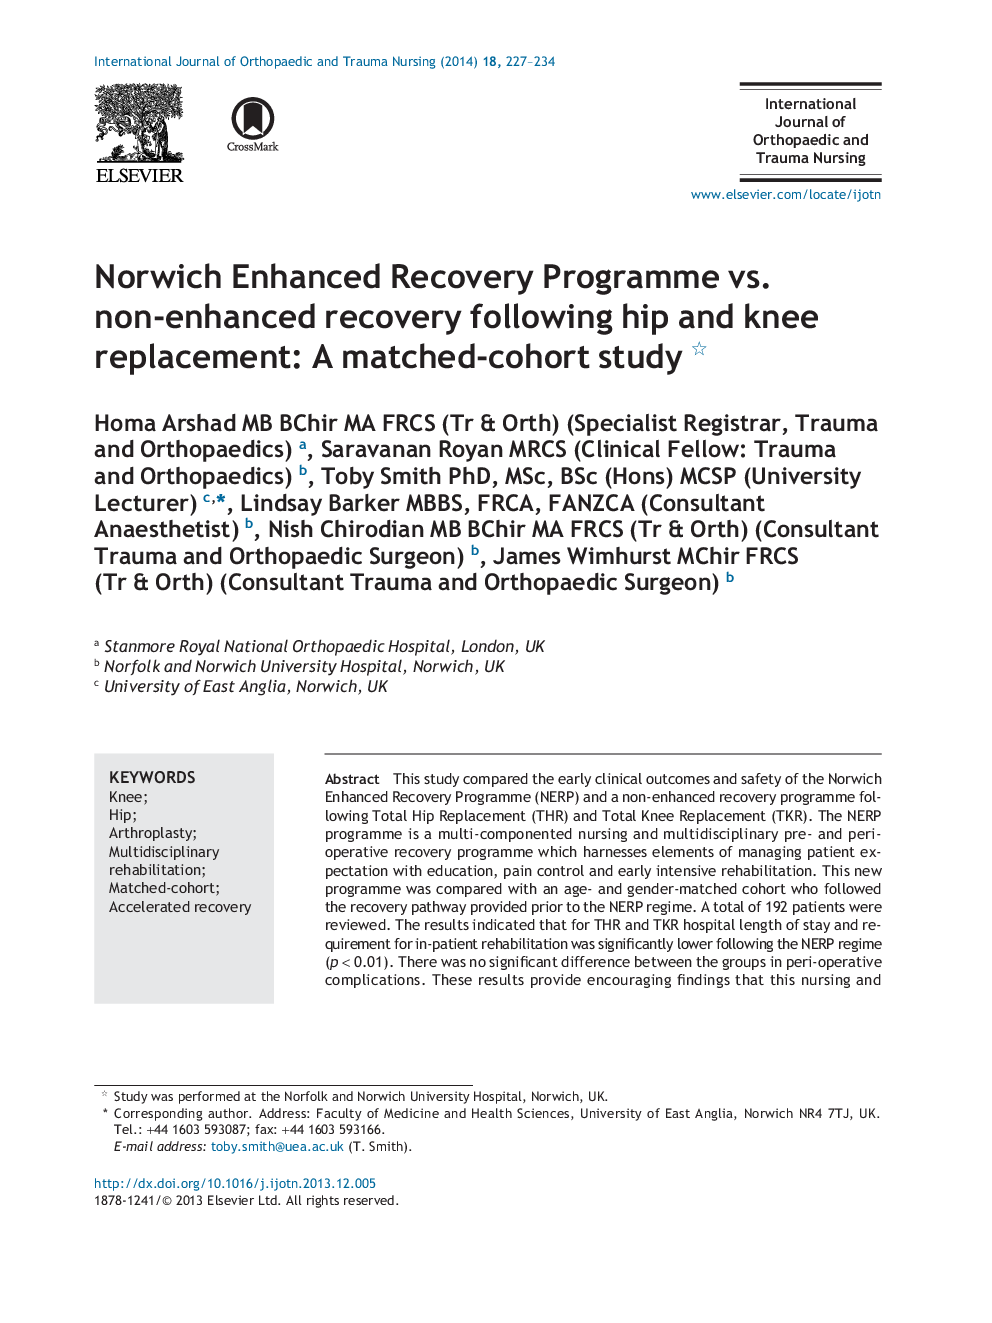 Norwich Enhanced Recovery Programme vs. non-enhanced recovery following hip and knee replacement: A matched-cohort study